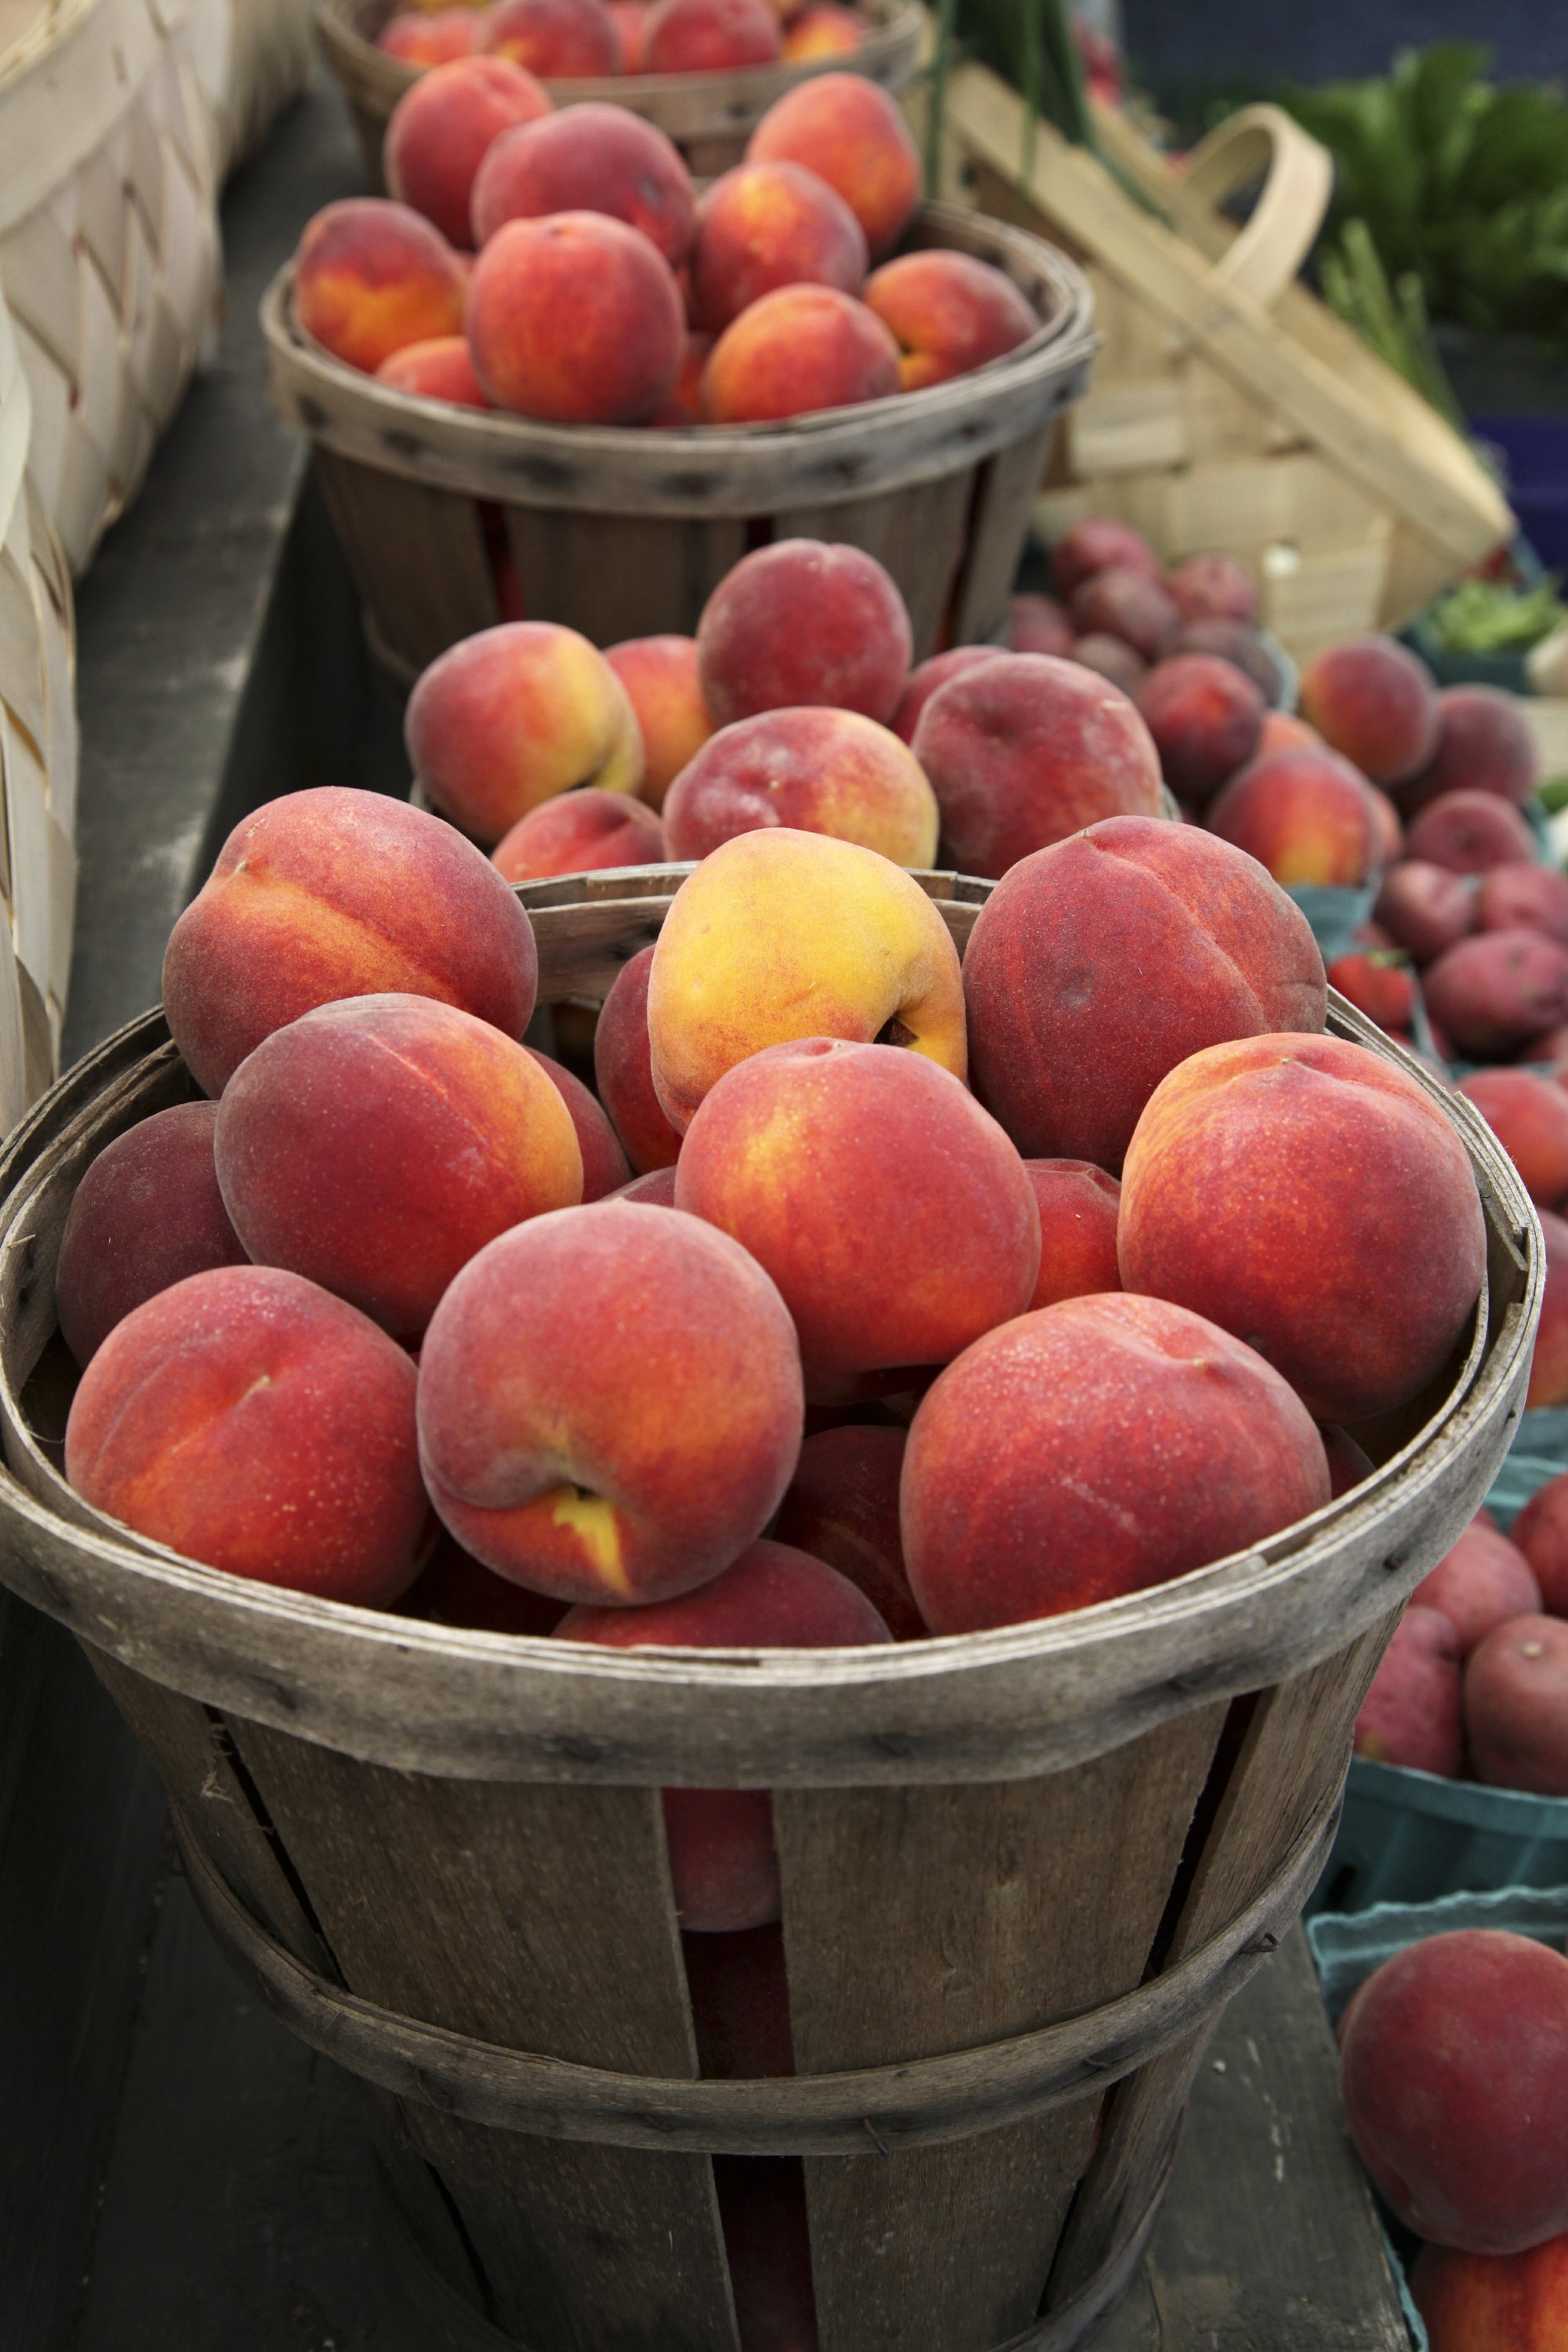 peach crop faces nearly 80 percent loss this year AP News